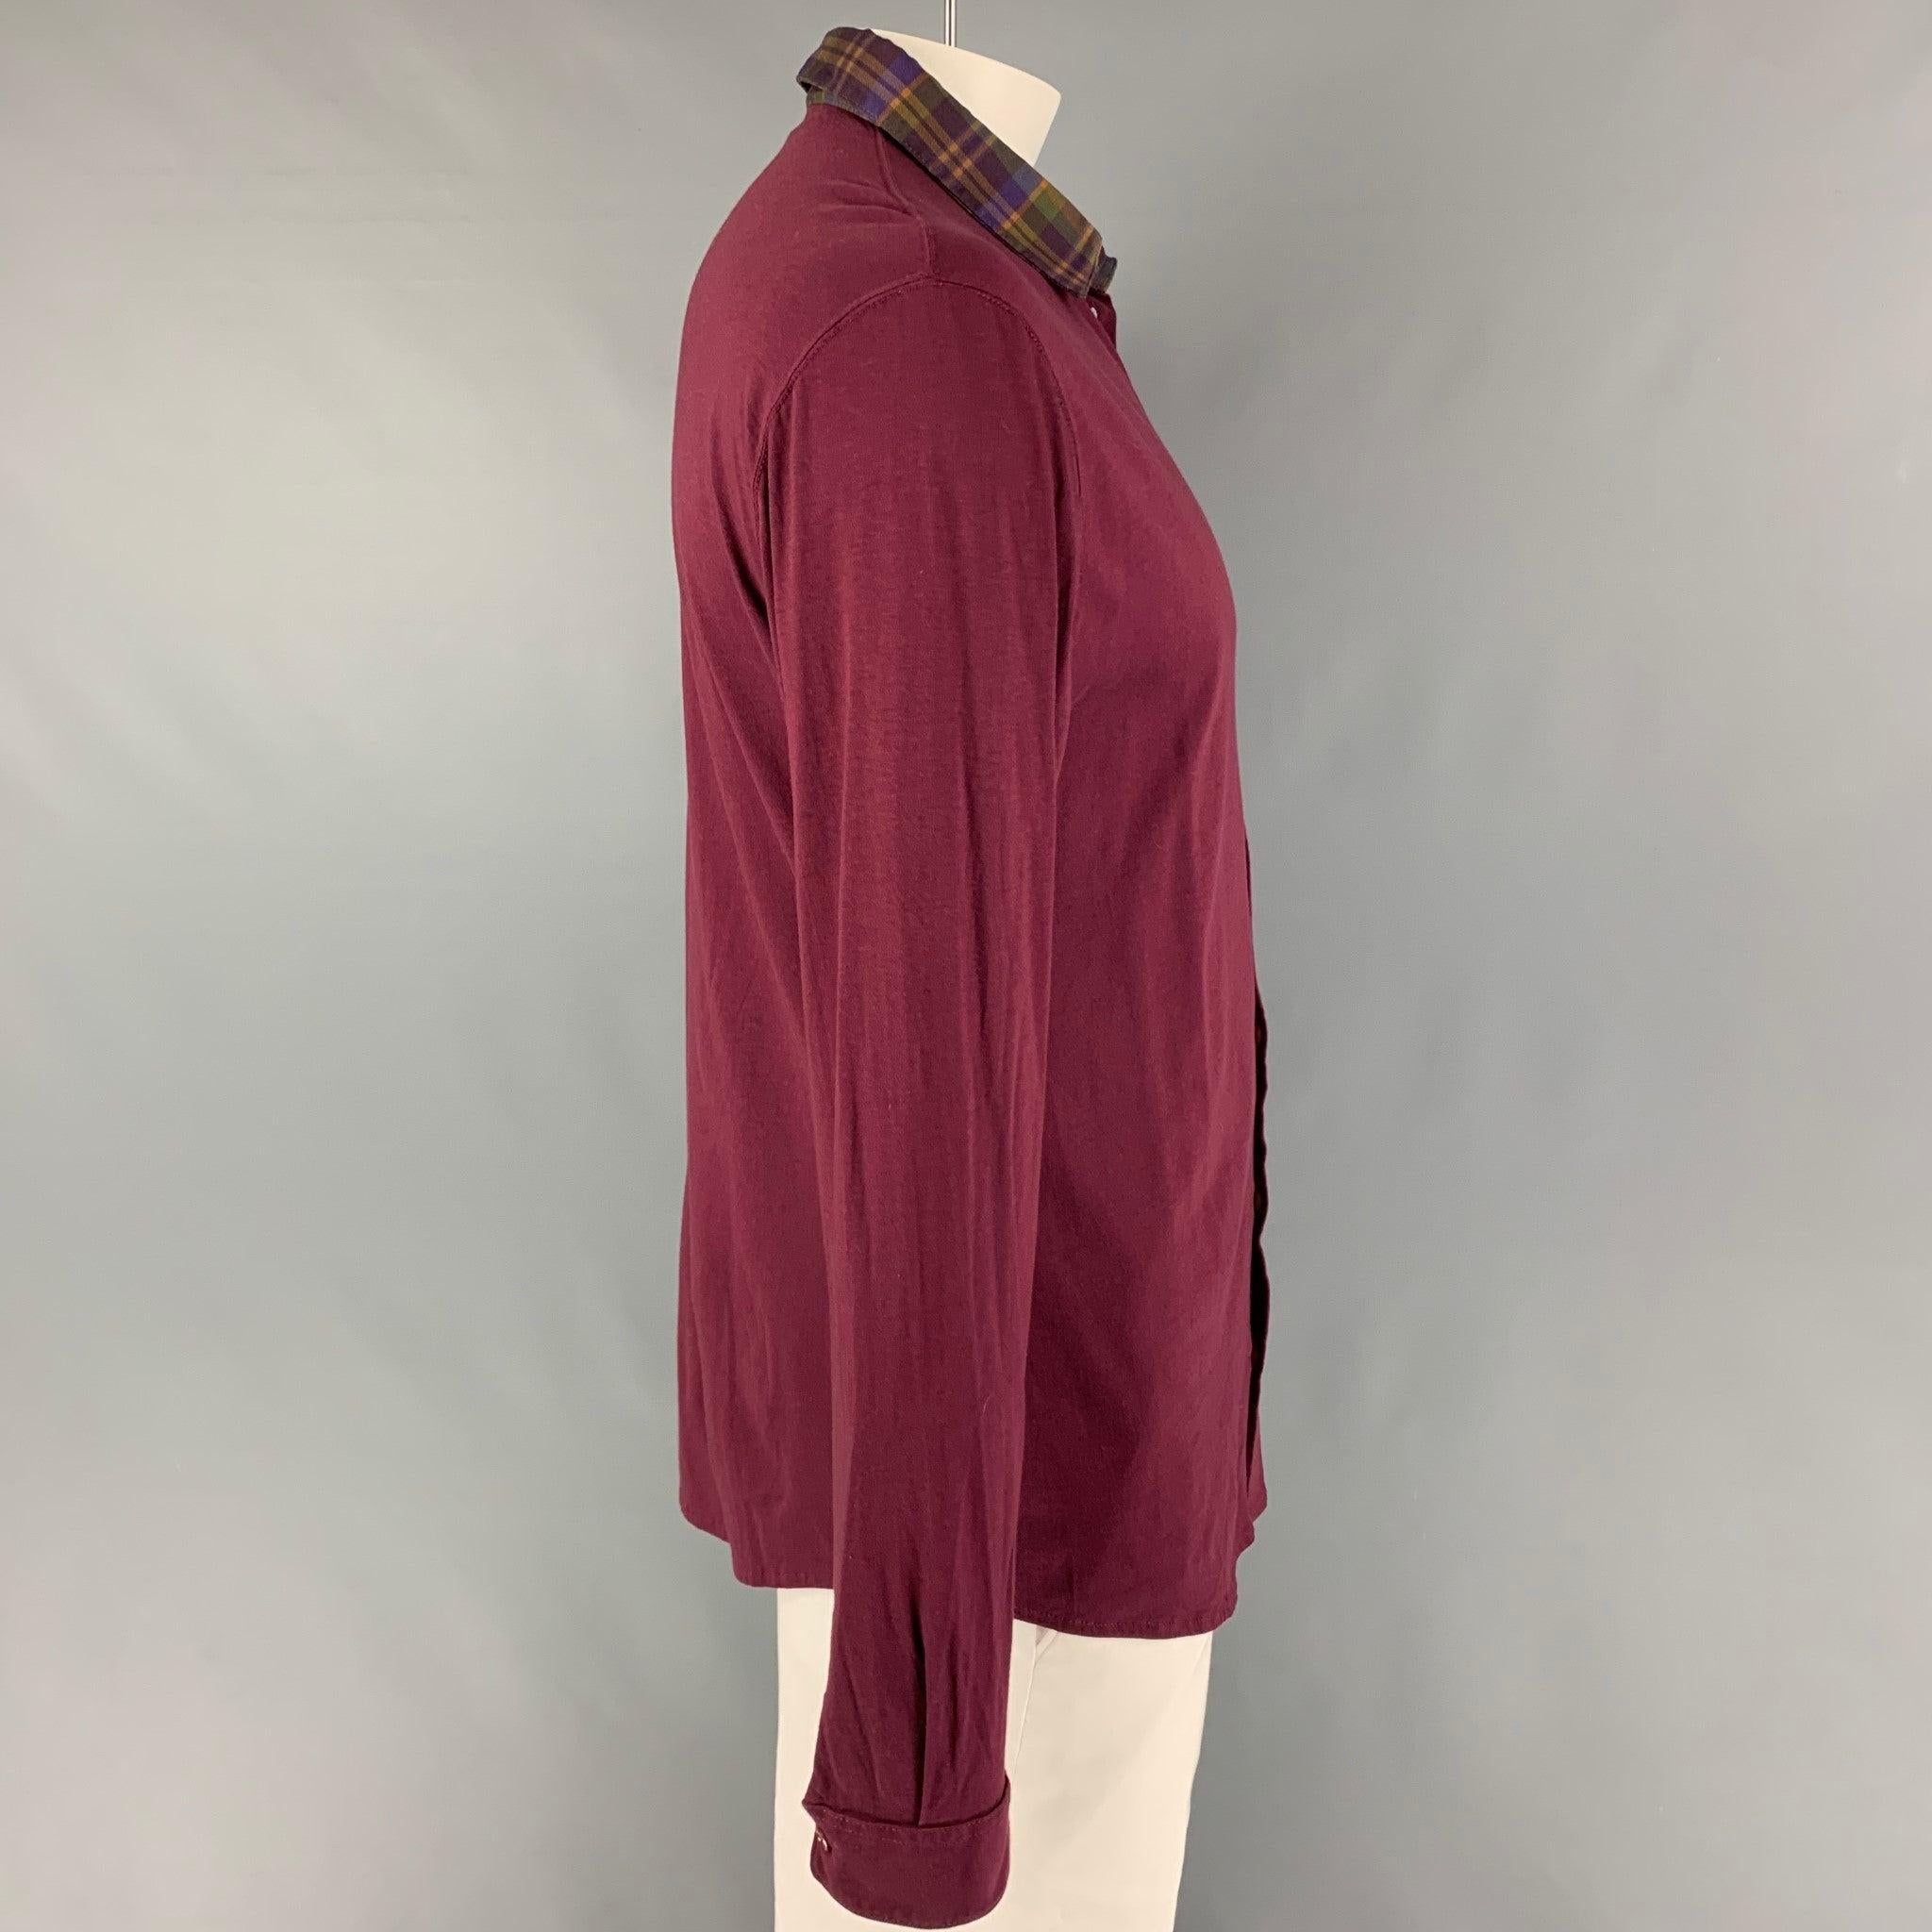 ETRO long sleeve shirt comes in a burgundy cotton featuring a plaid spread collar, embroidered logo, and a buttoned closure. Made in Italy.
Very Good
Pre-Owned Condition. 

Marked:   XL  

Measurements: 
 
Shoulder: 19 inches  Chest: 44 inches 